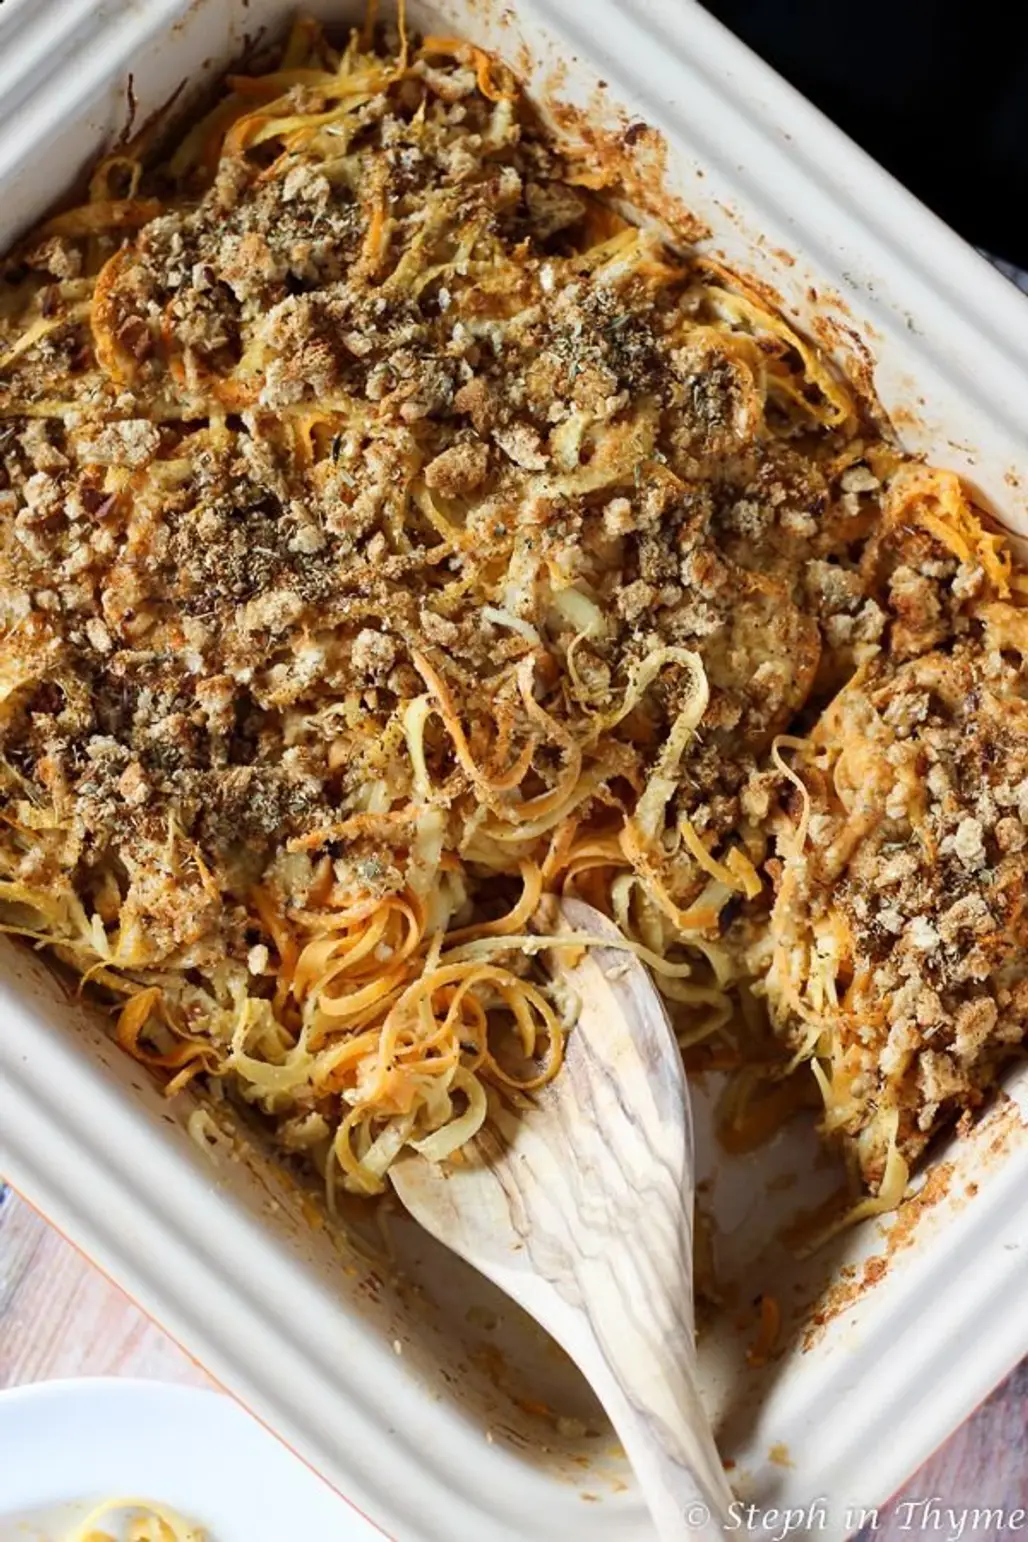 Spiralized Root Vegetable Casserole with Turnip, Rutabaga, and Sweet Potato Noodles